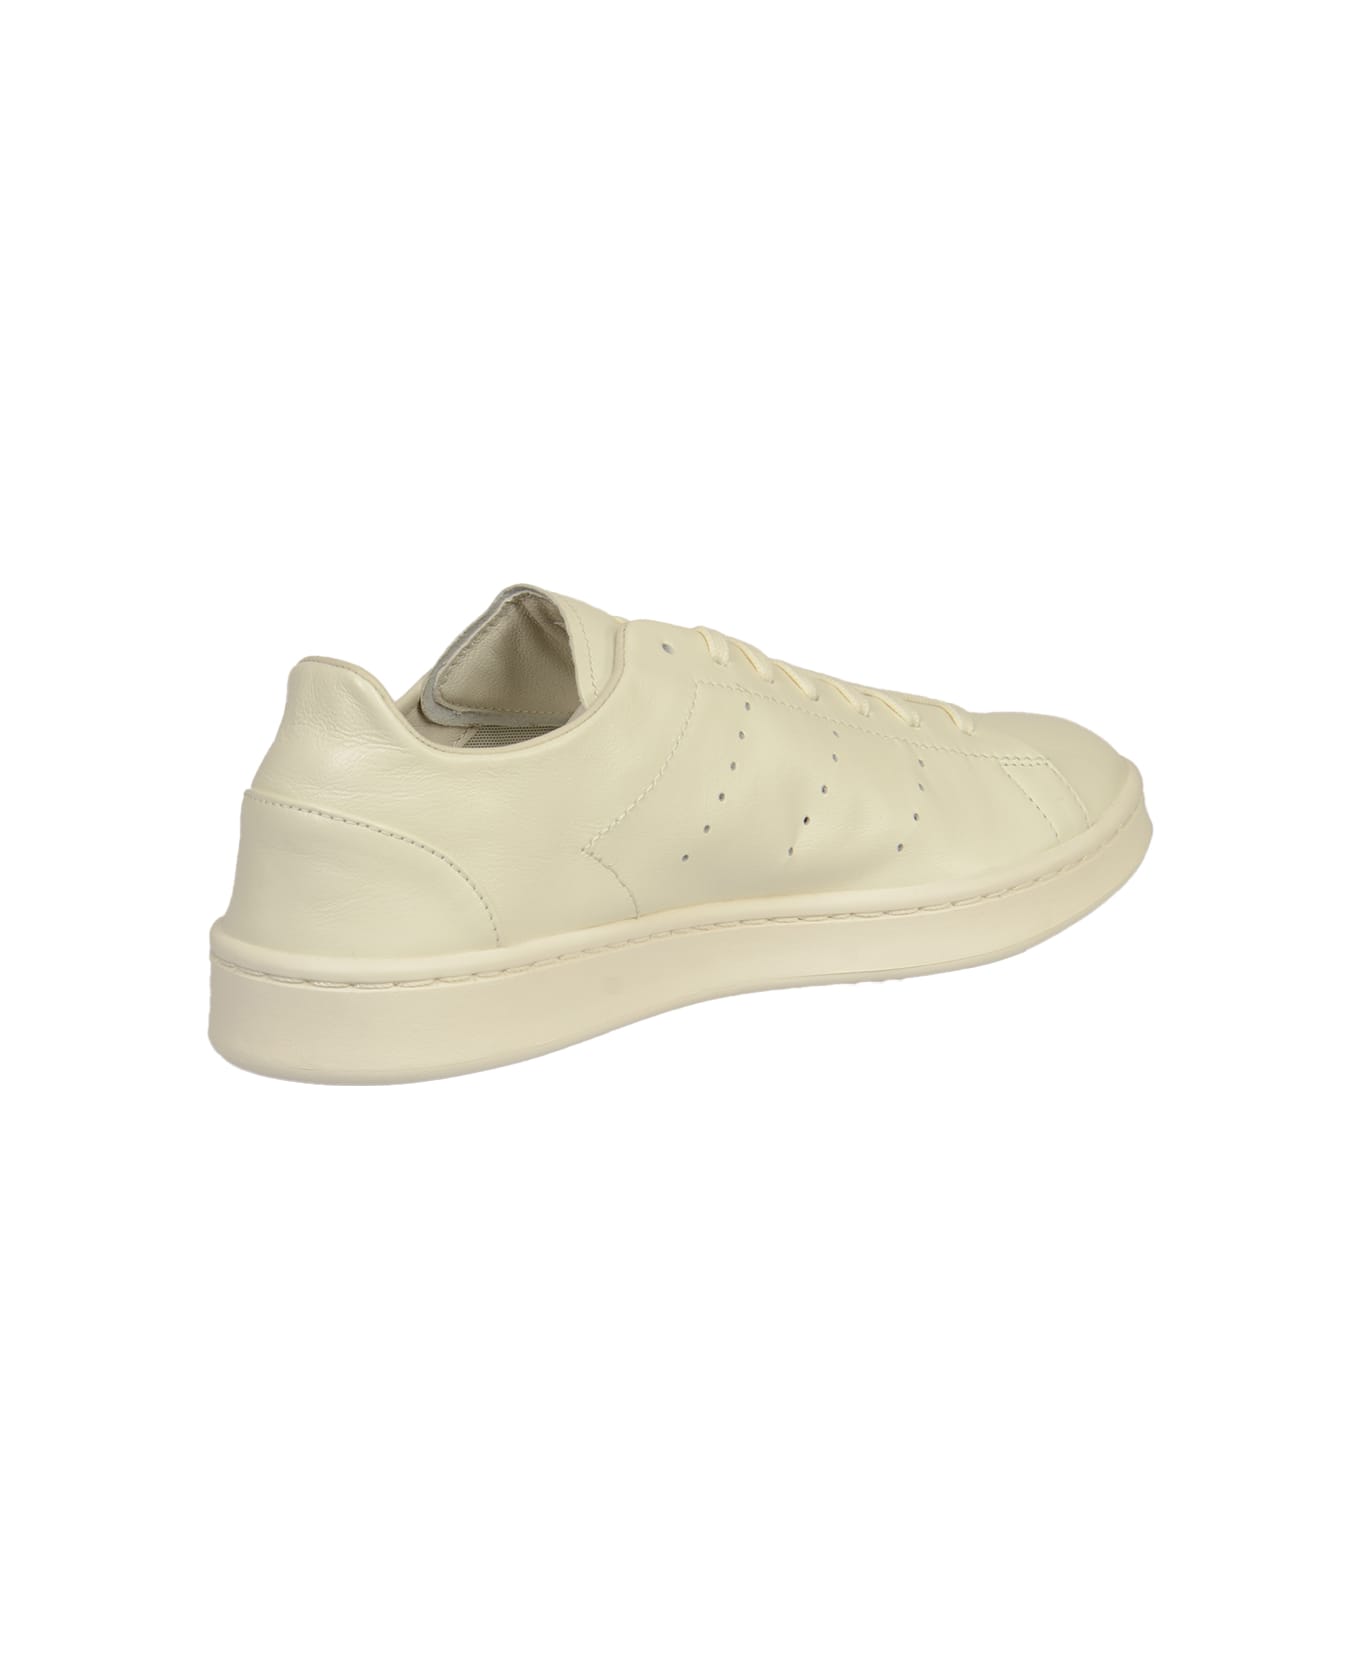 Y-3 Stan Smith Sneakers - Off White